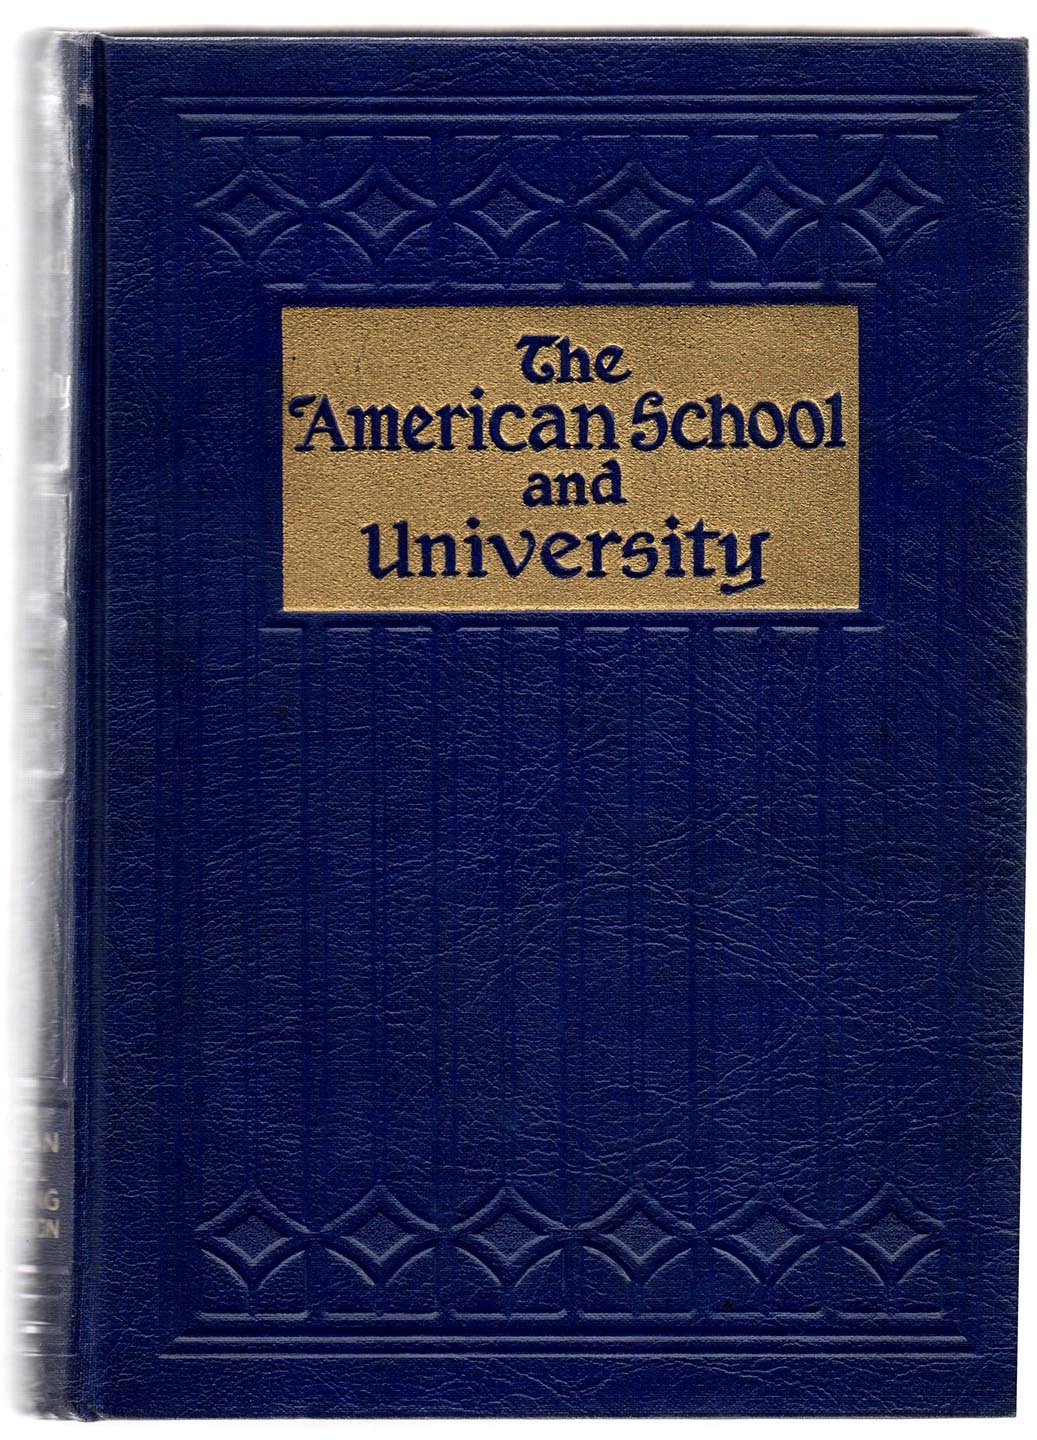 The American School and University: A Yearbook devoted to the Design, Construction, Equipment, Utilization, and Maintenance of Educational Buildings and Grounds 1936